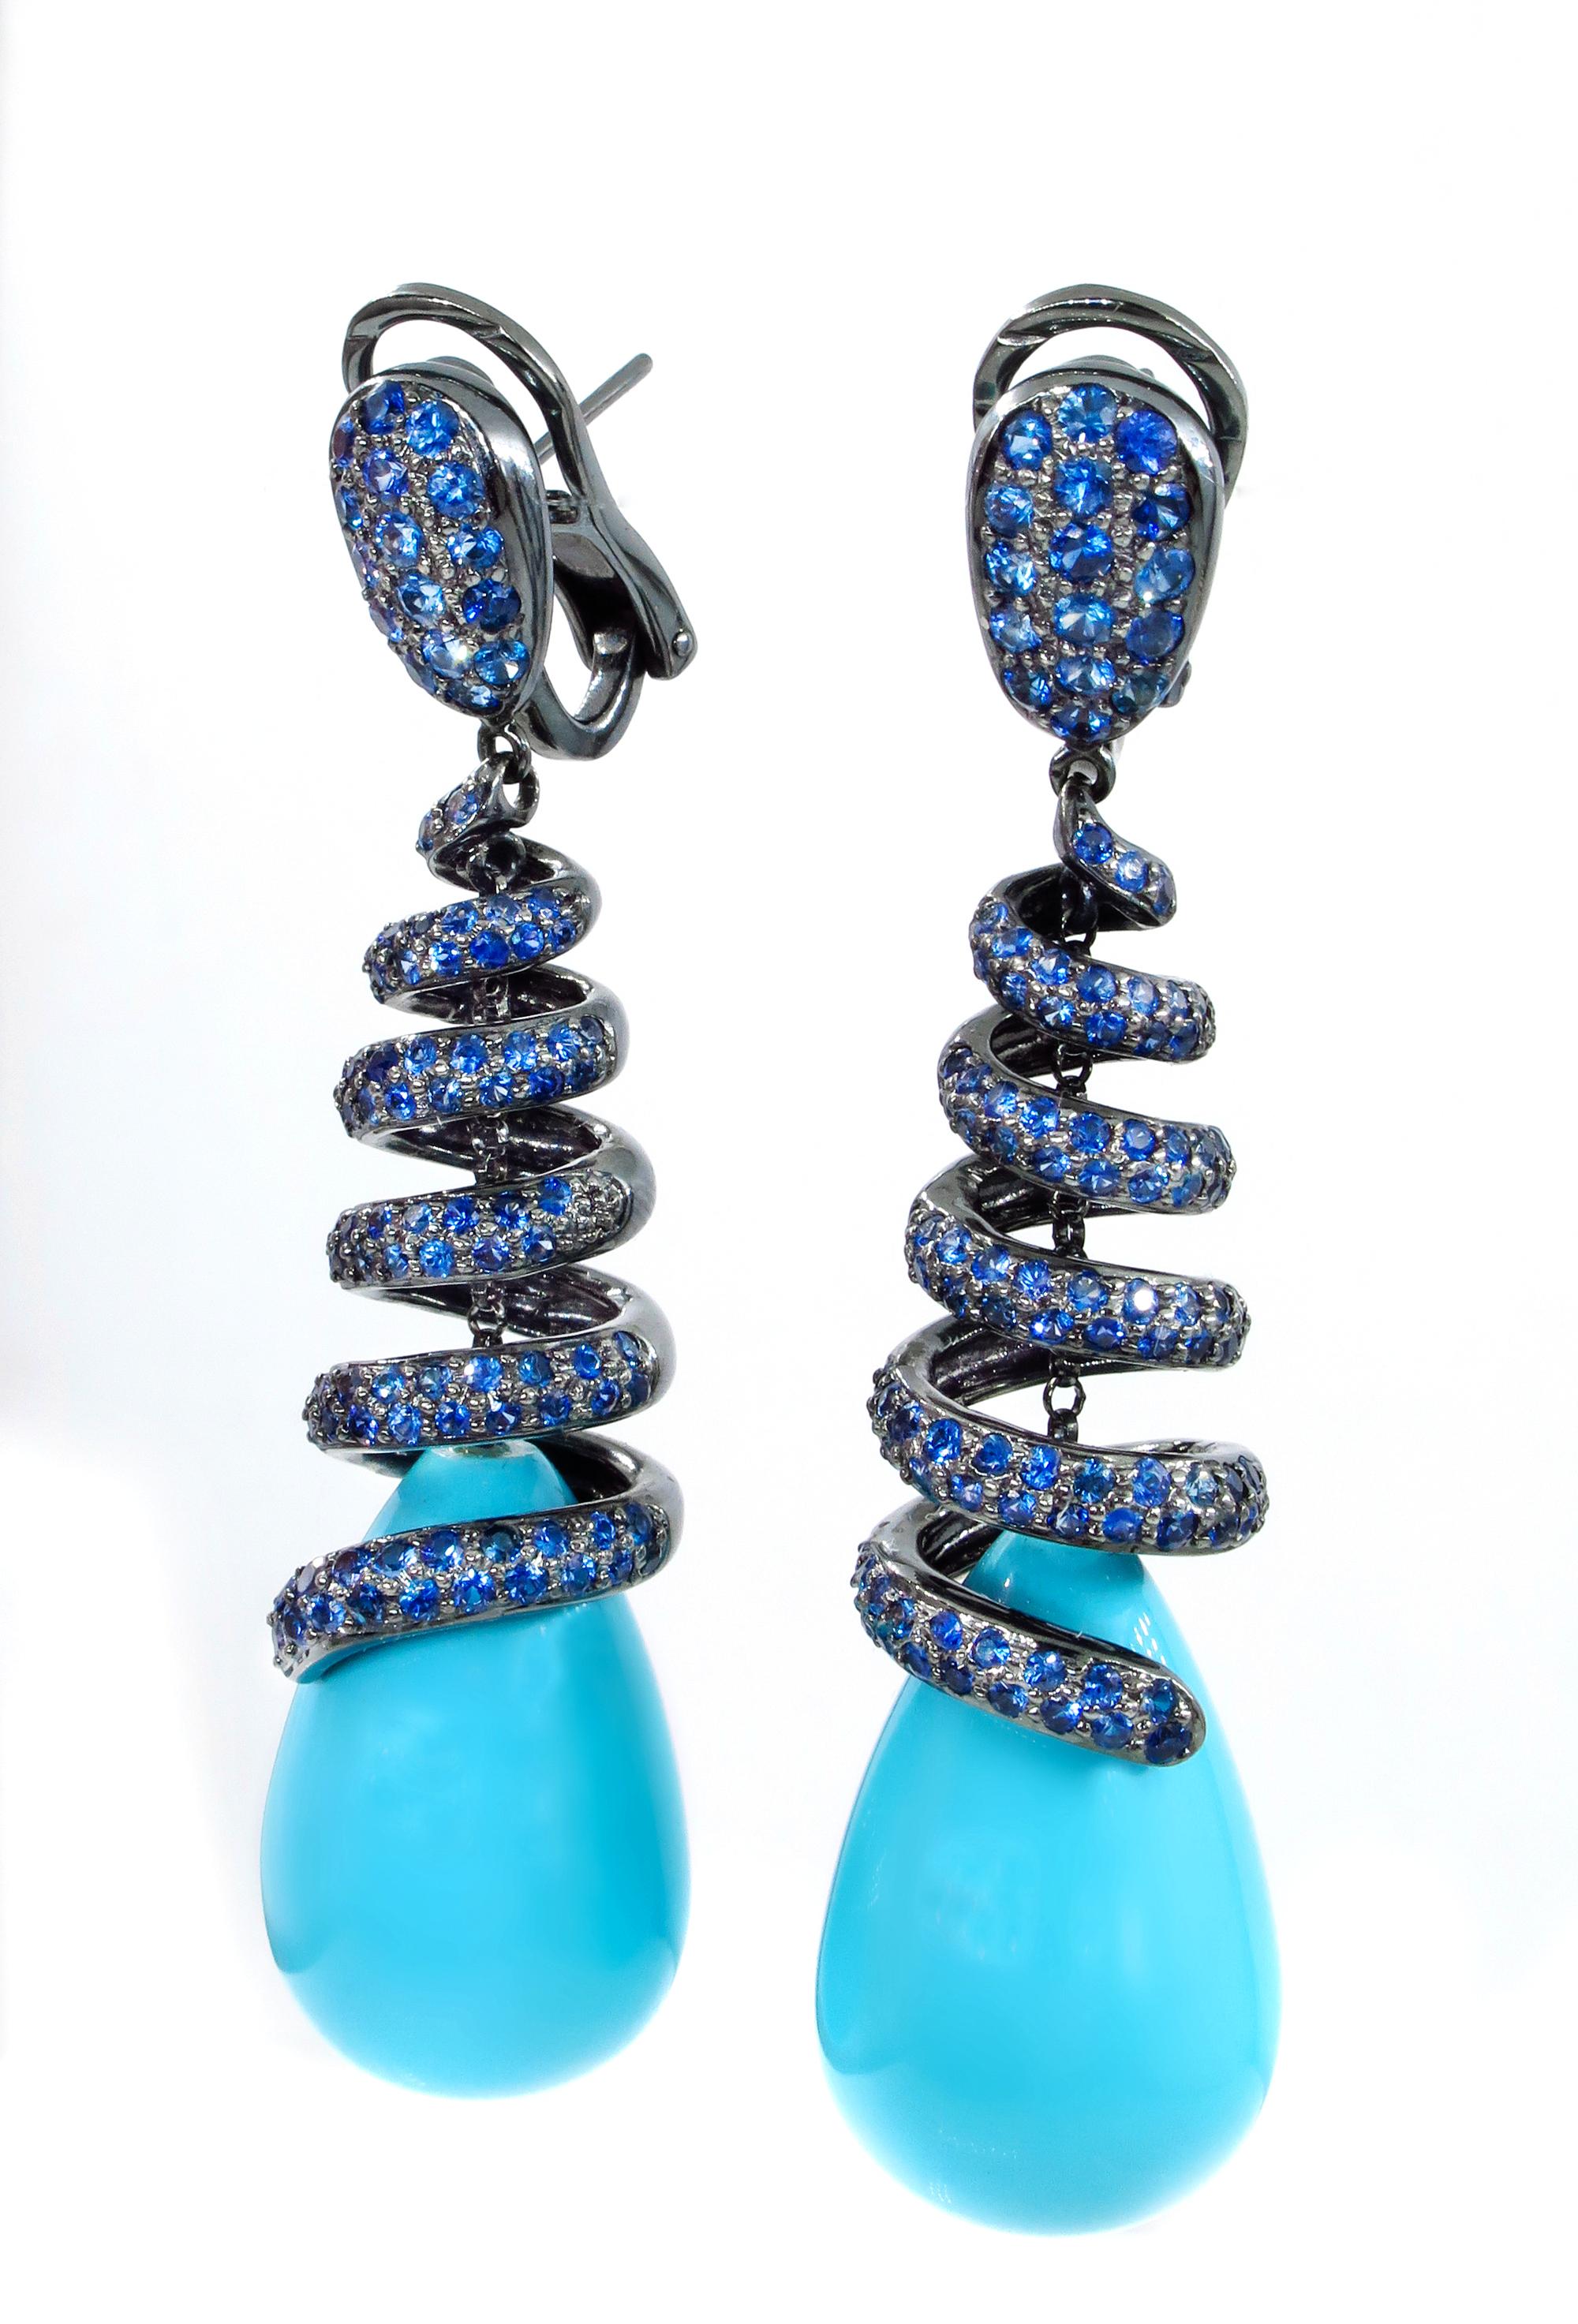 These earrings are spectacular! This extraordinary perfectly matched Baby Blue Turquoise Teardrop mounted into magnificent Swirls of Blue Sapphires drop Earrings.
Fabulous workmanship on both front and back this set looks great from any angle!
The